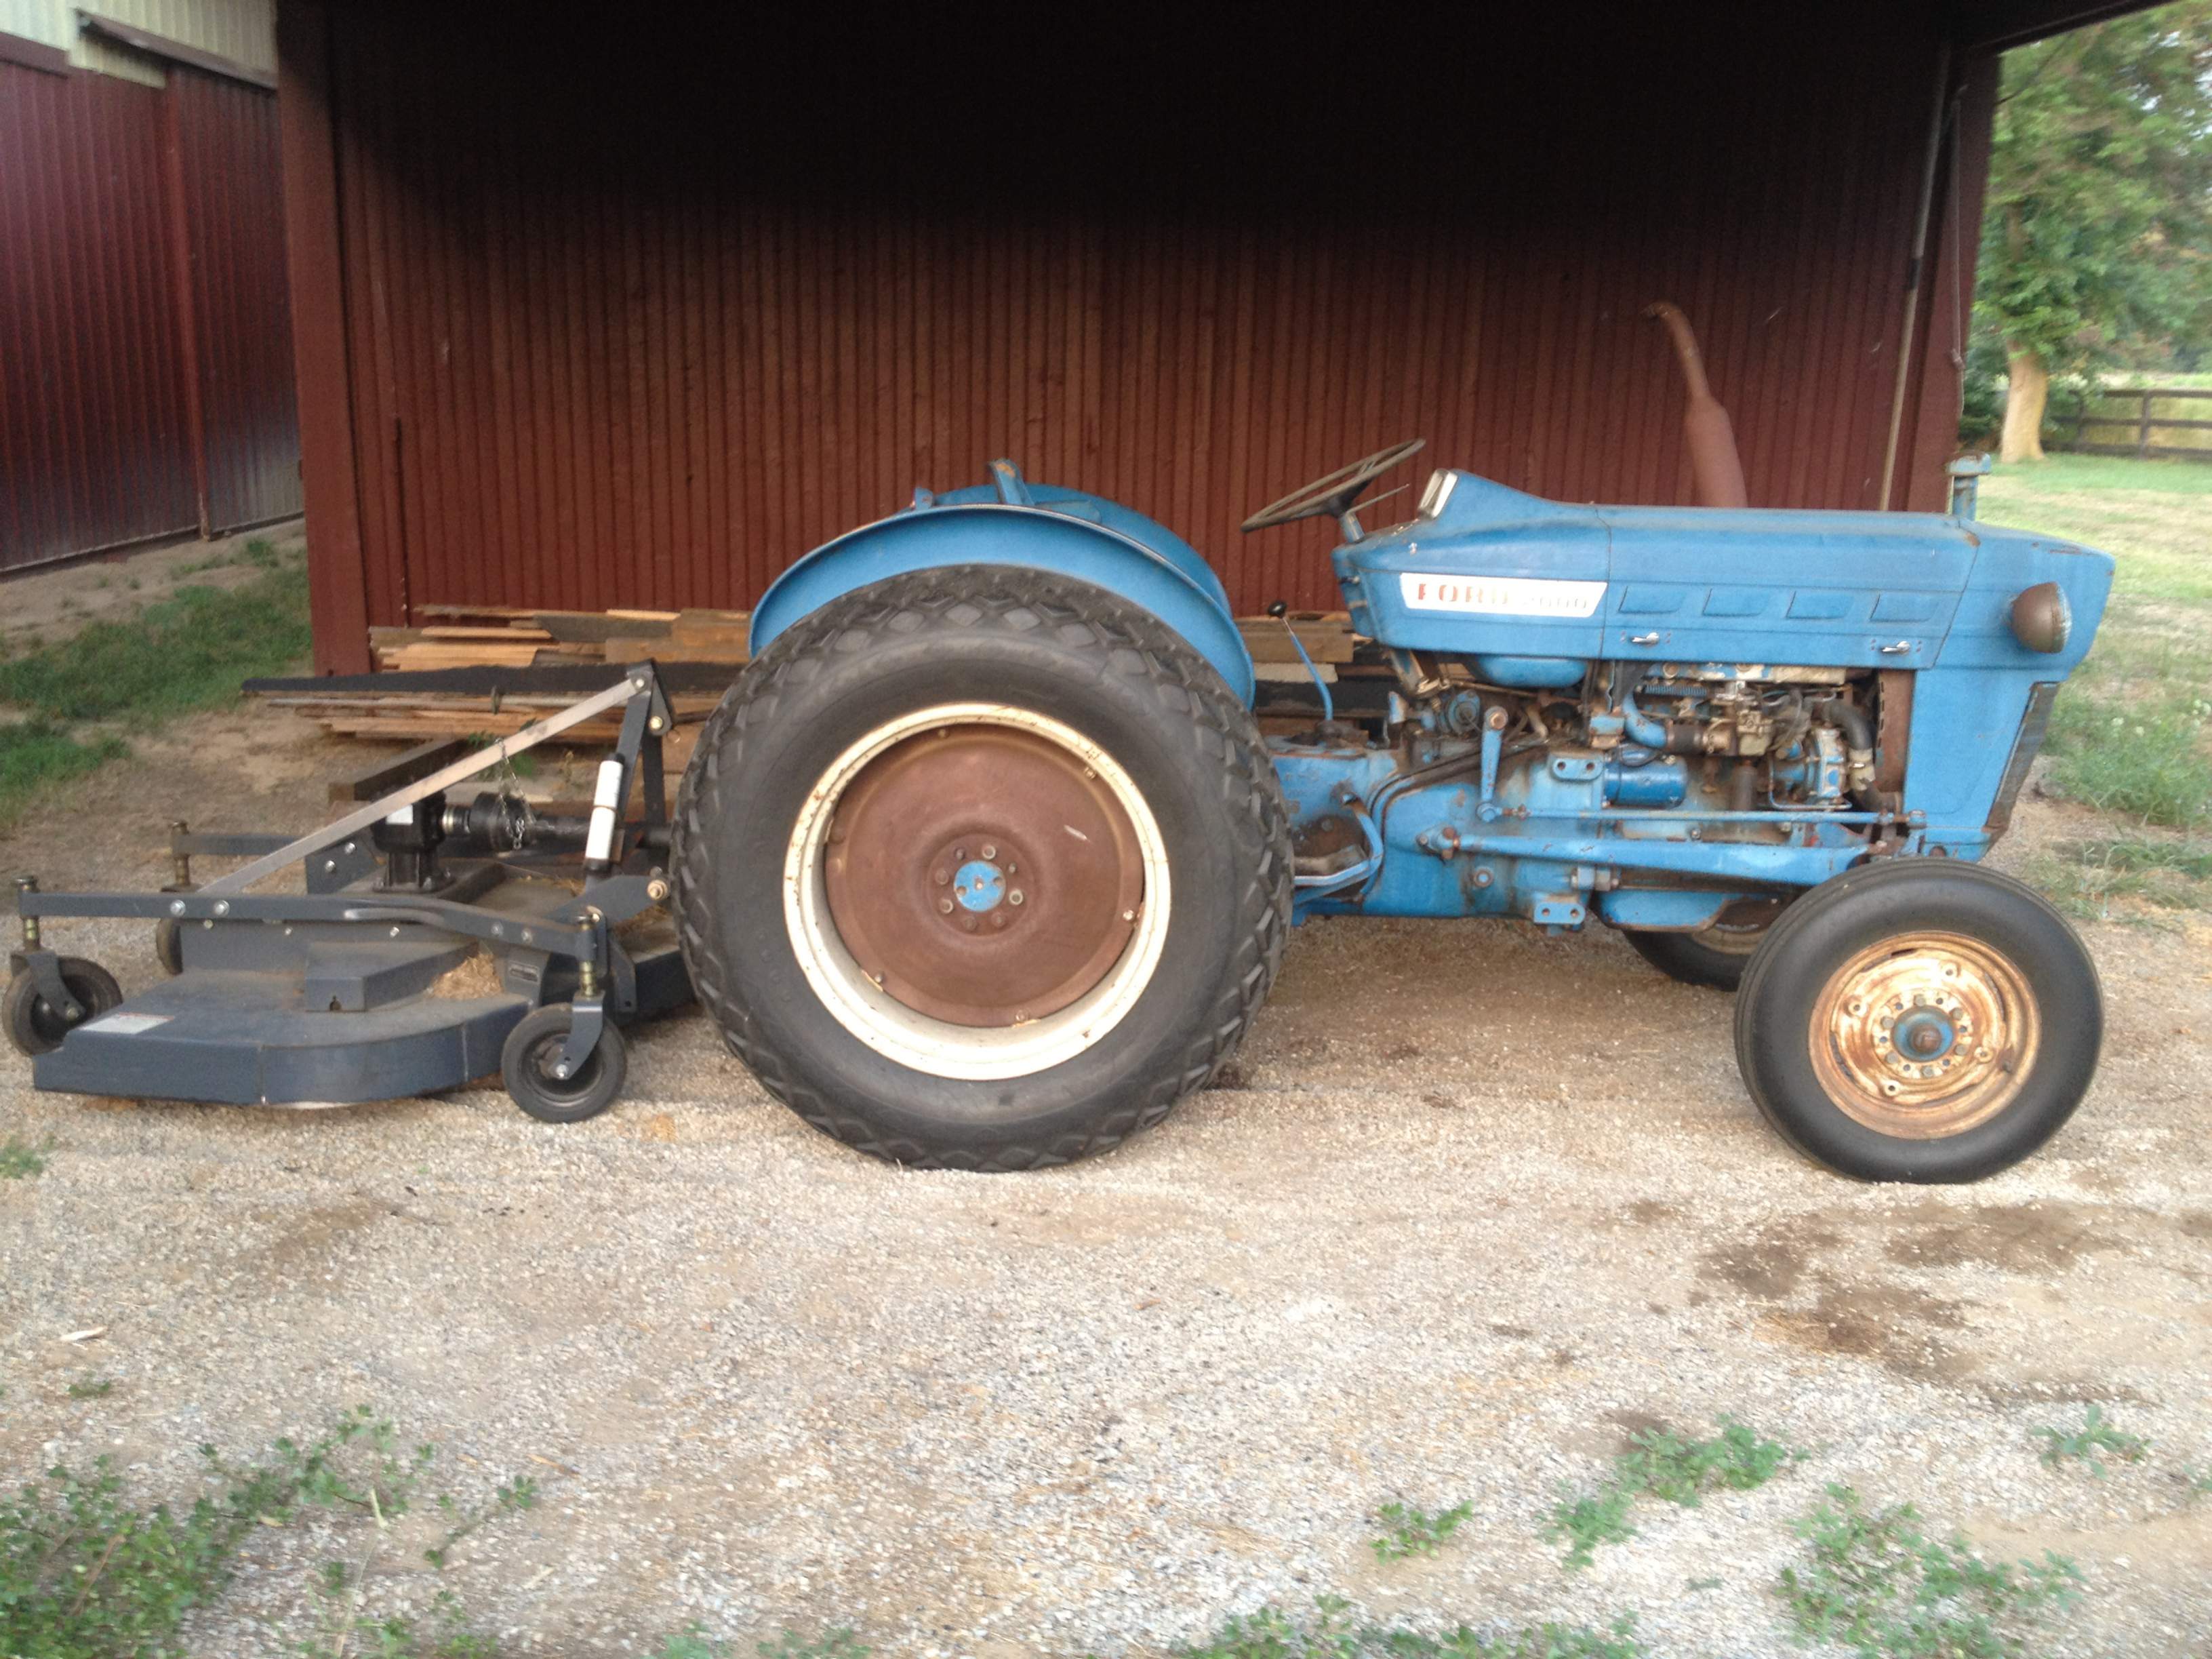 Oil Fuel New Owner Of 1952 Ford 8n And 1968 Ford 00 Gasser Needs Some Service Suggestions Tractorbynet